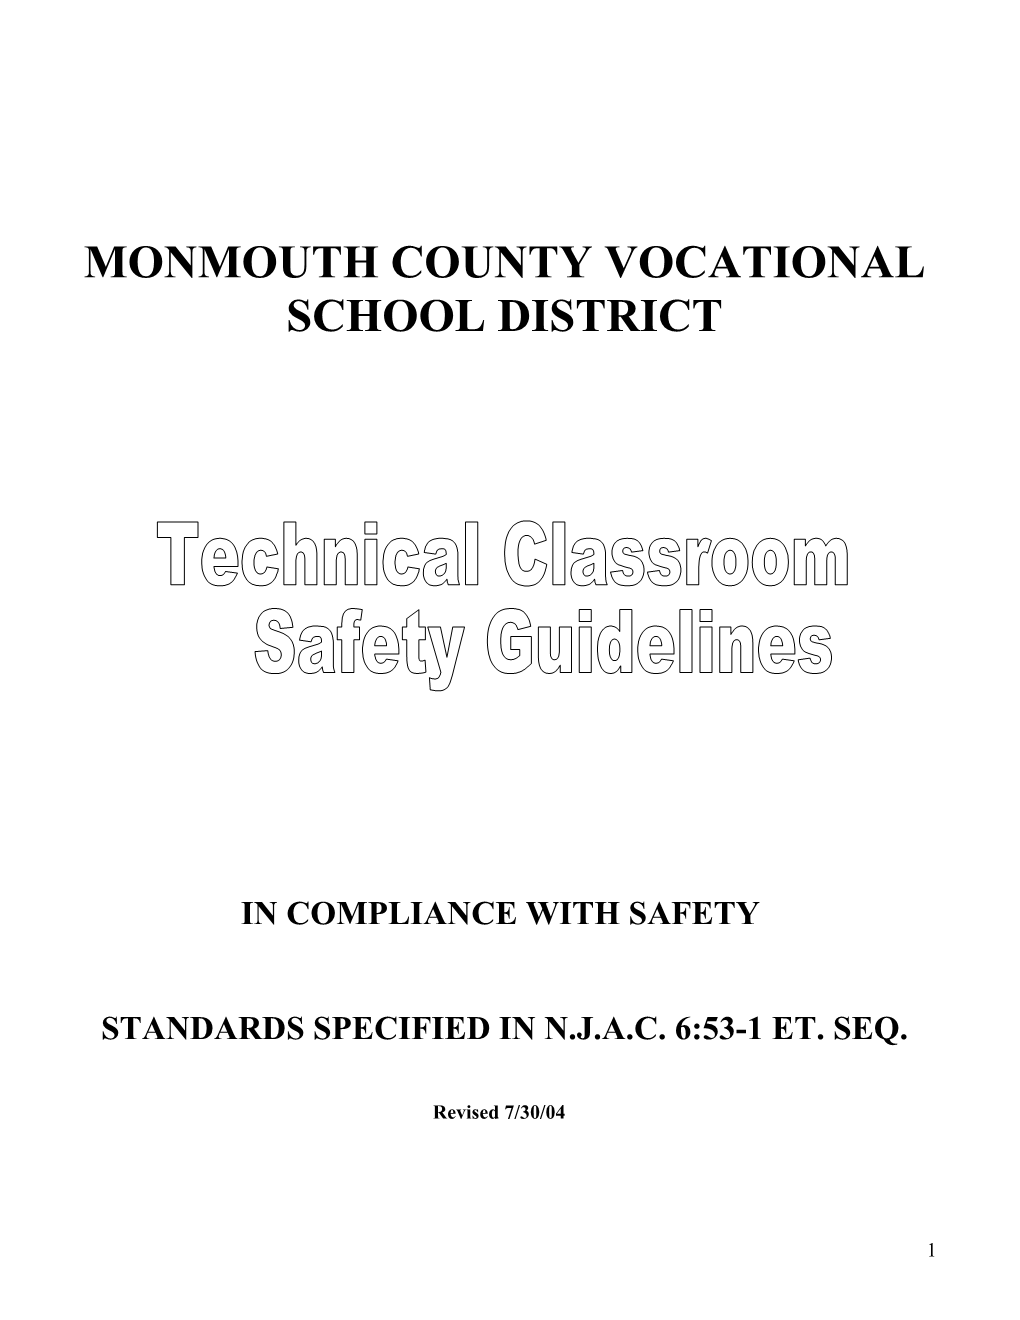 Monmouth County Vocational School District s1